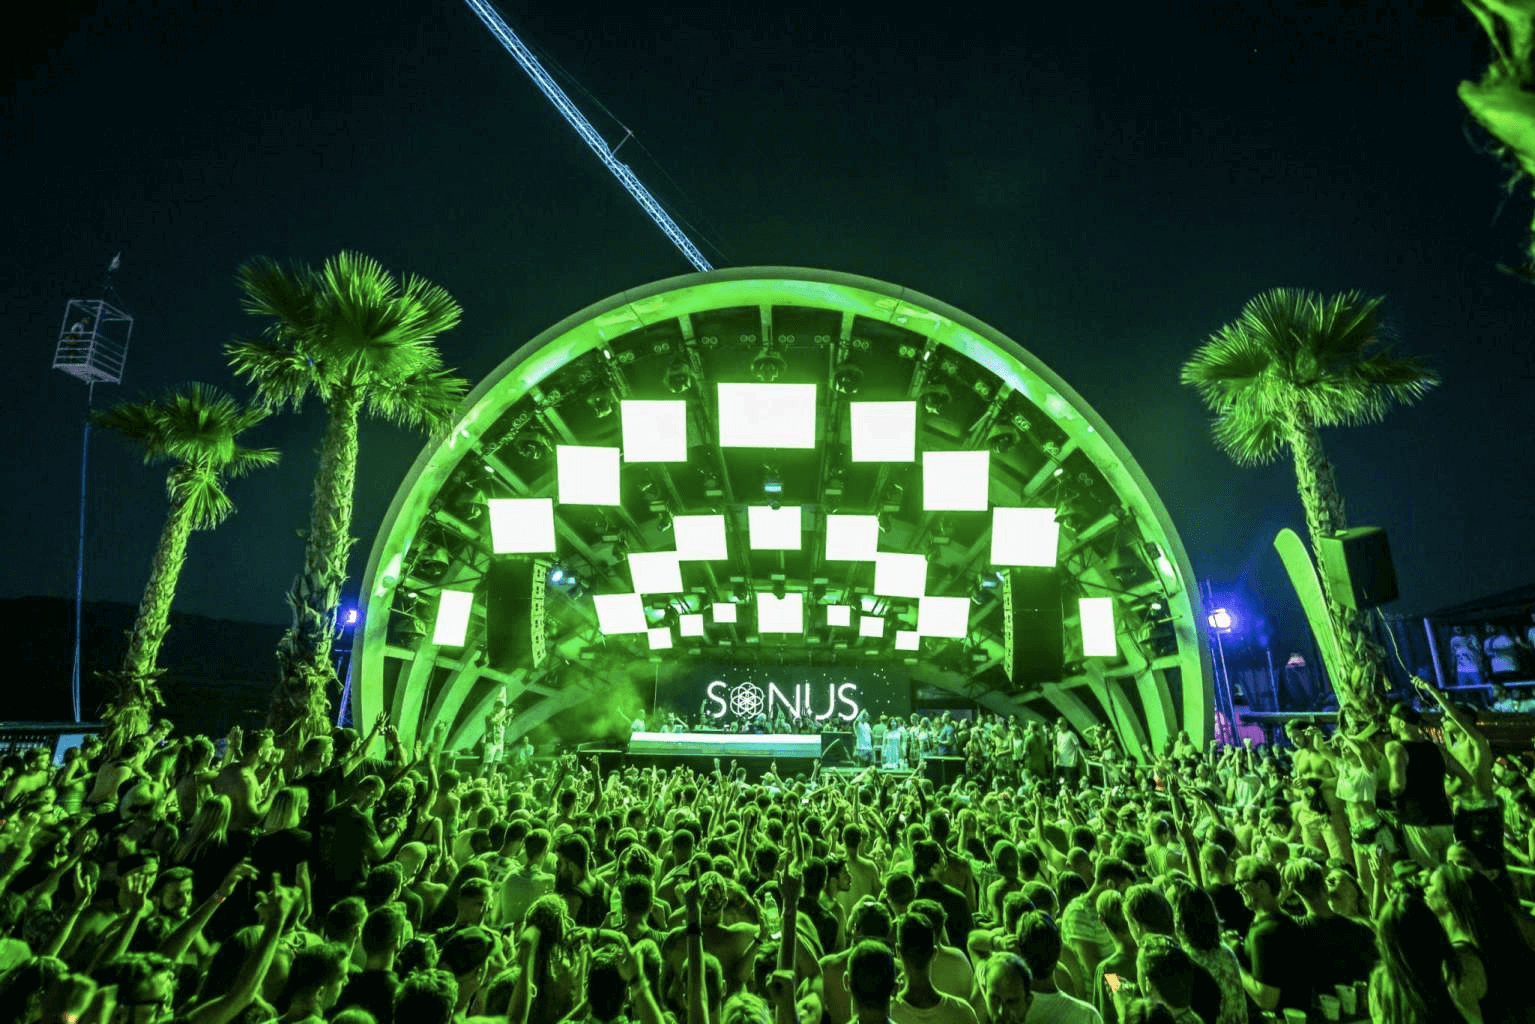 The Sonus Festival’s schedule is available !